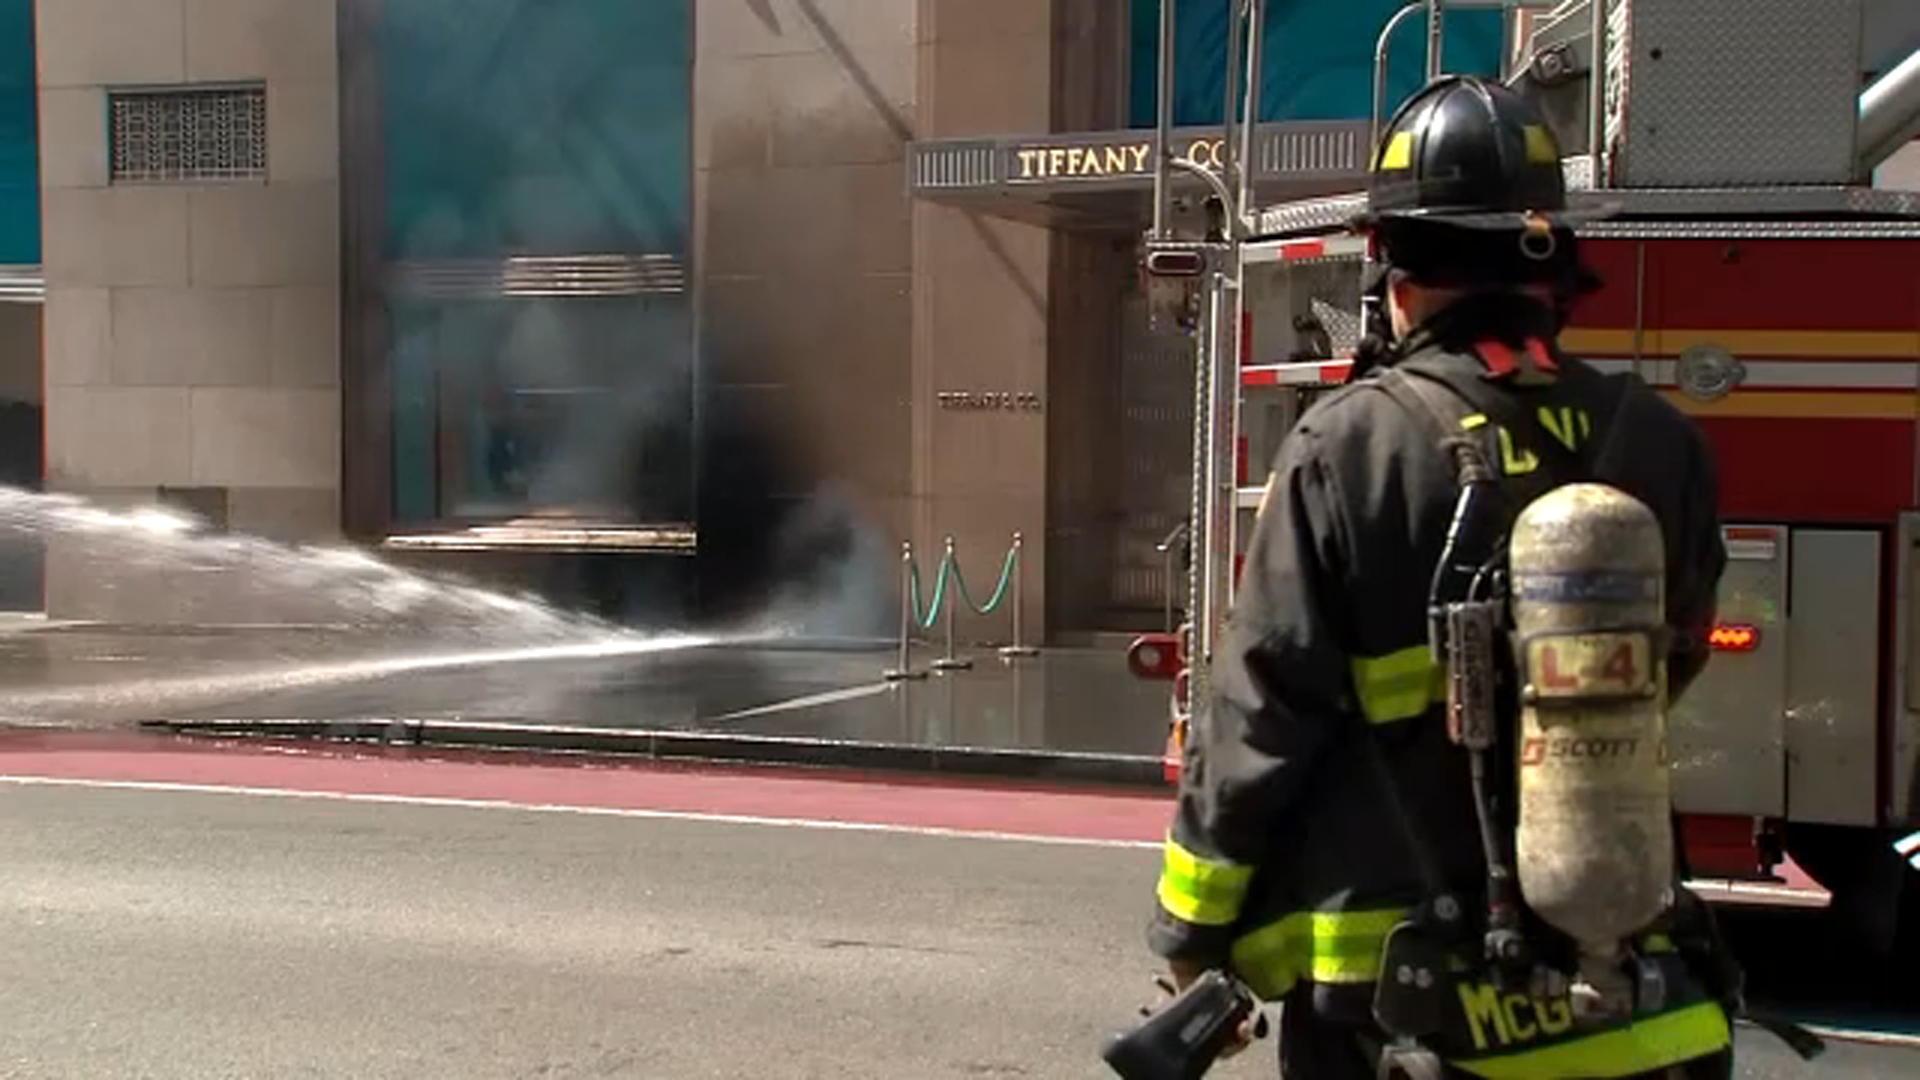 New York: Fire breaks out at Tiffany & Co building in Manhattan, US News